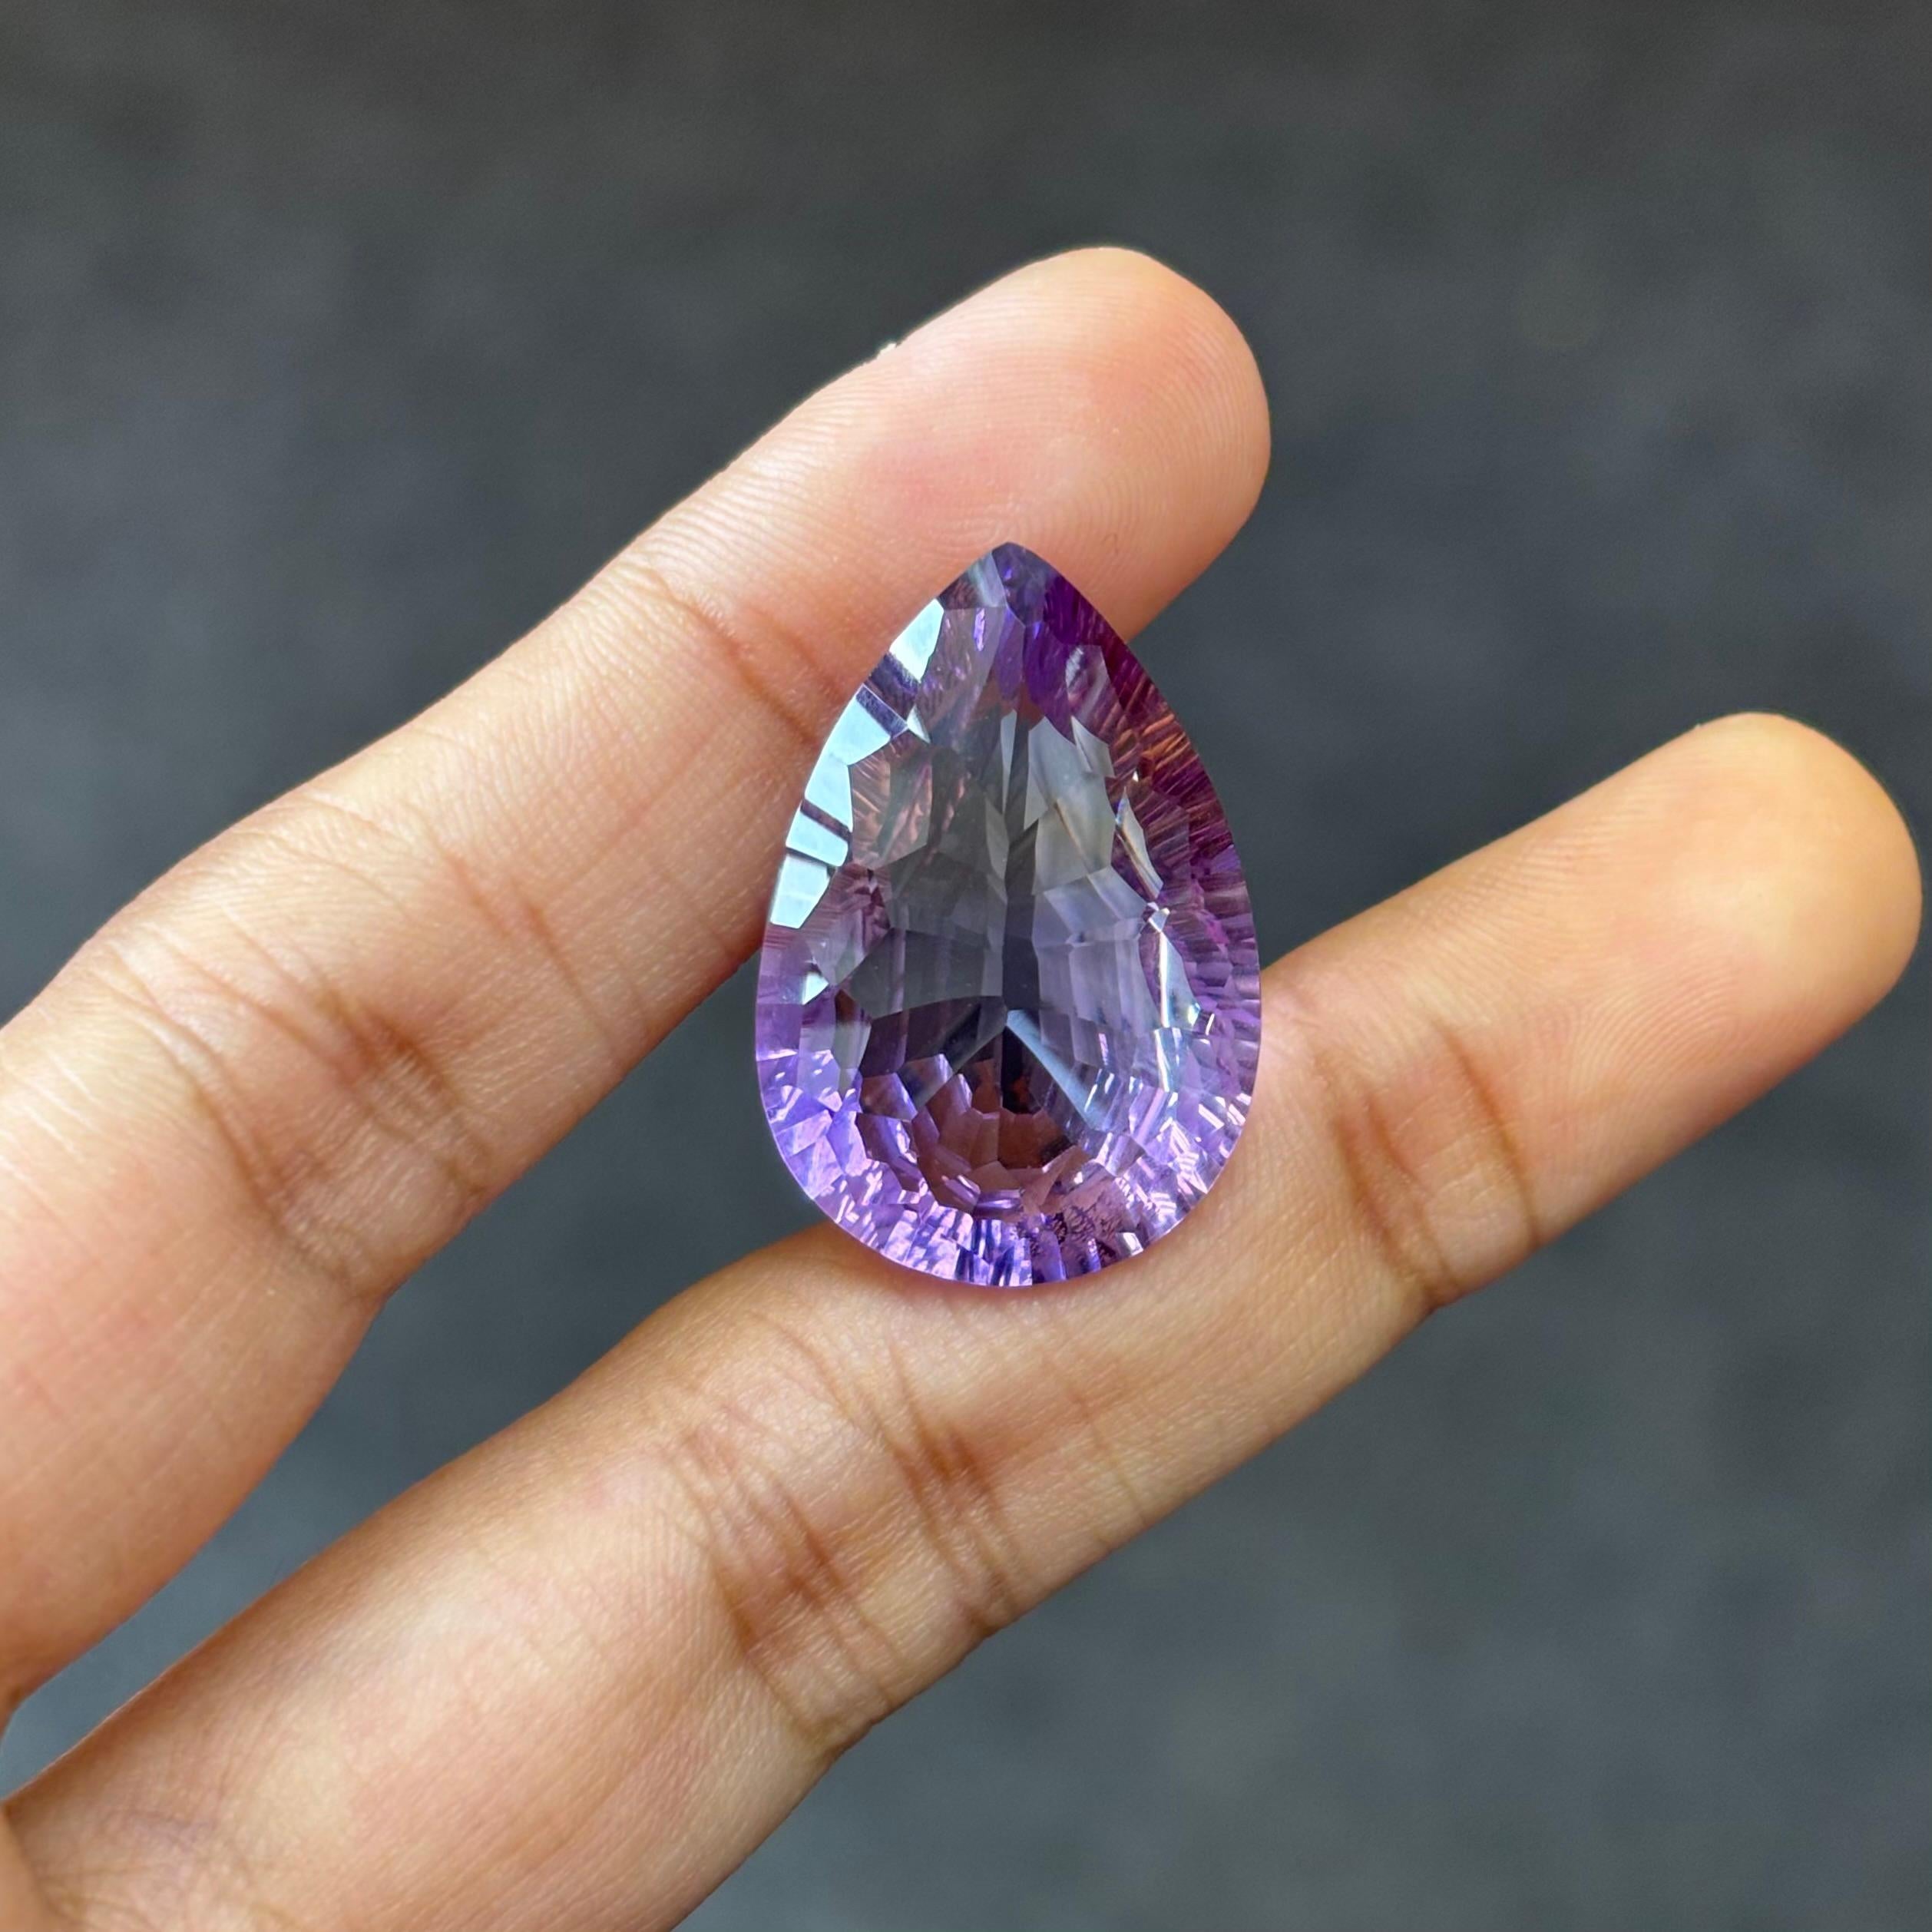 A 25.63 Carat Ametrine gemstone, resplendent in hues of vivid purple. The Ametrine is cut to perfection in a pear shape.

Ametrine is said to be the perfect balance of the properties of an amethyst stone and a citrine stone. As a stone of both